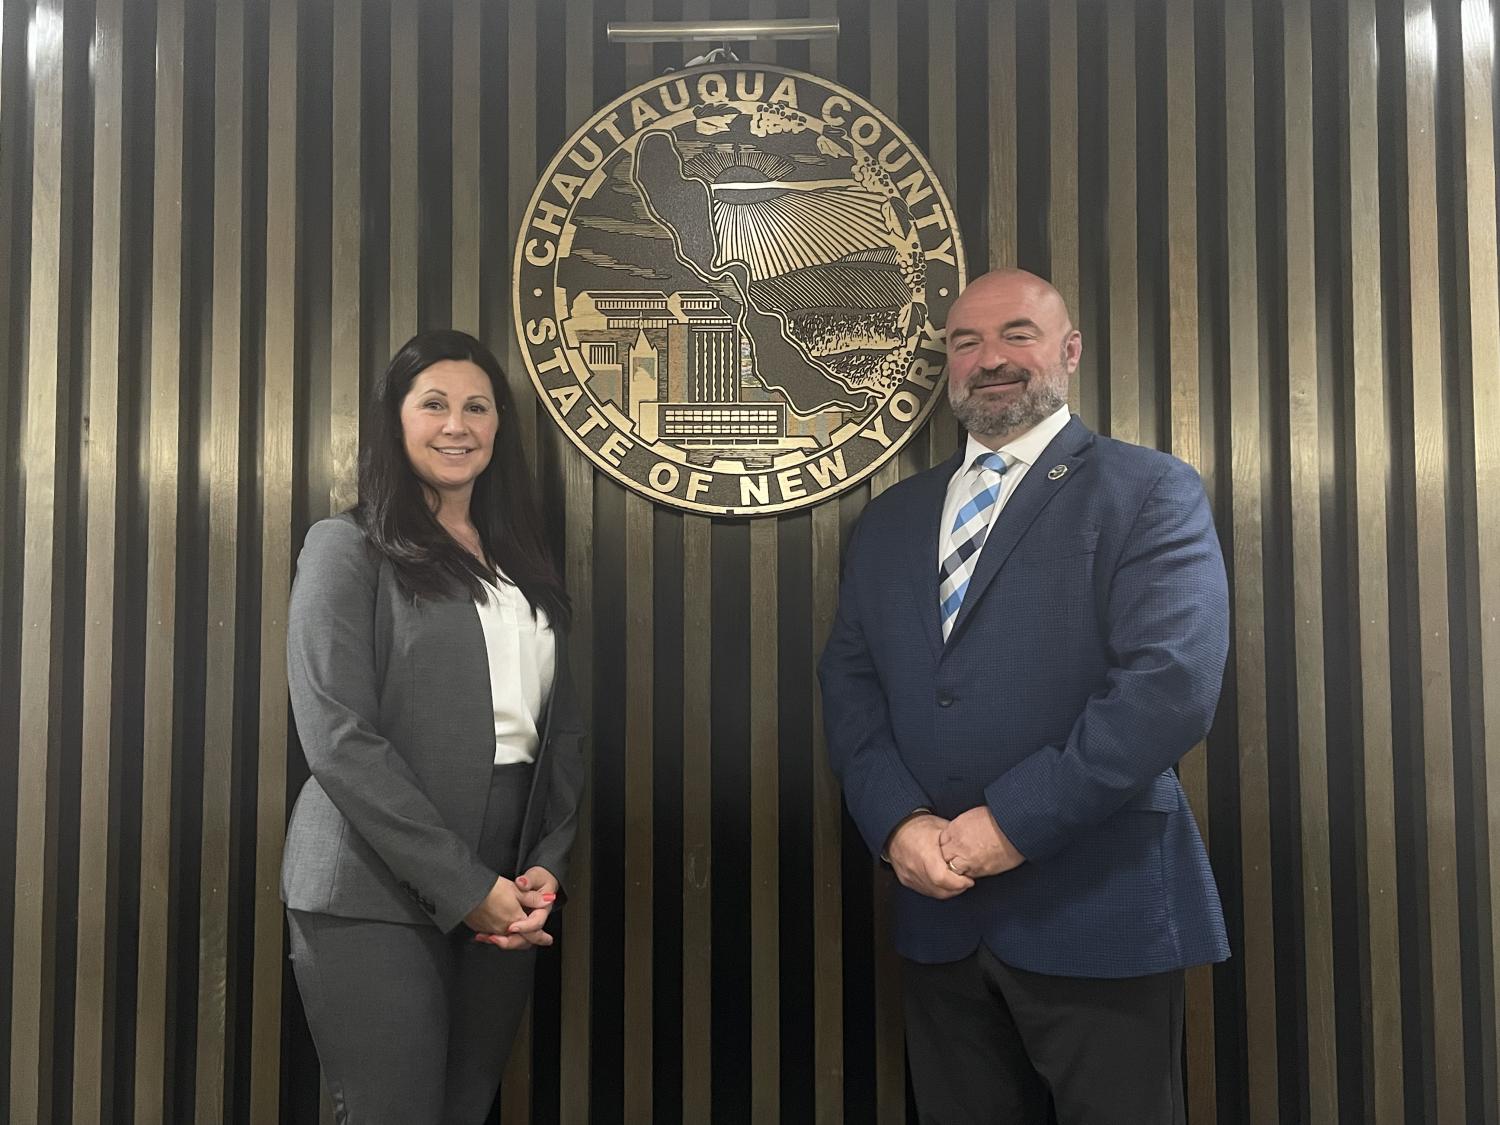 (Pictured left to right: Chautauqua County Budget Director Jennifer C. Swan and Chautauqua County Executive PJ Wendel)